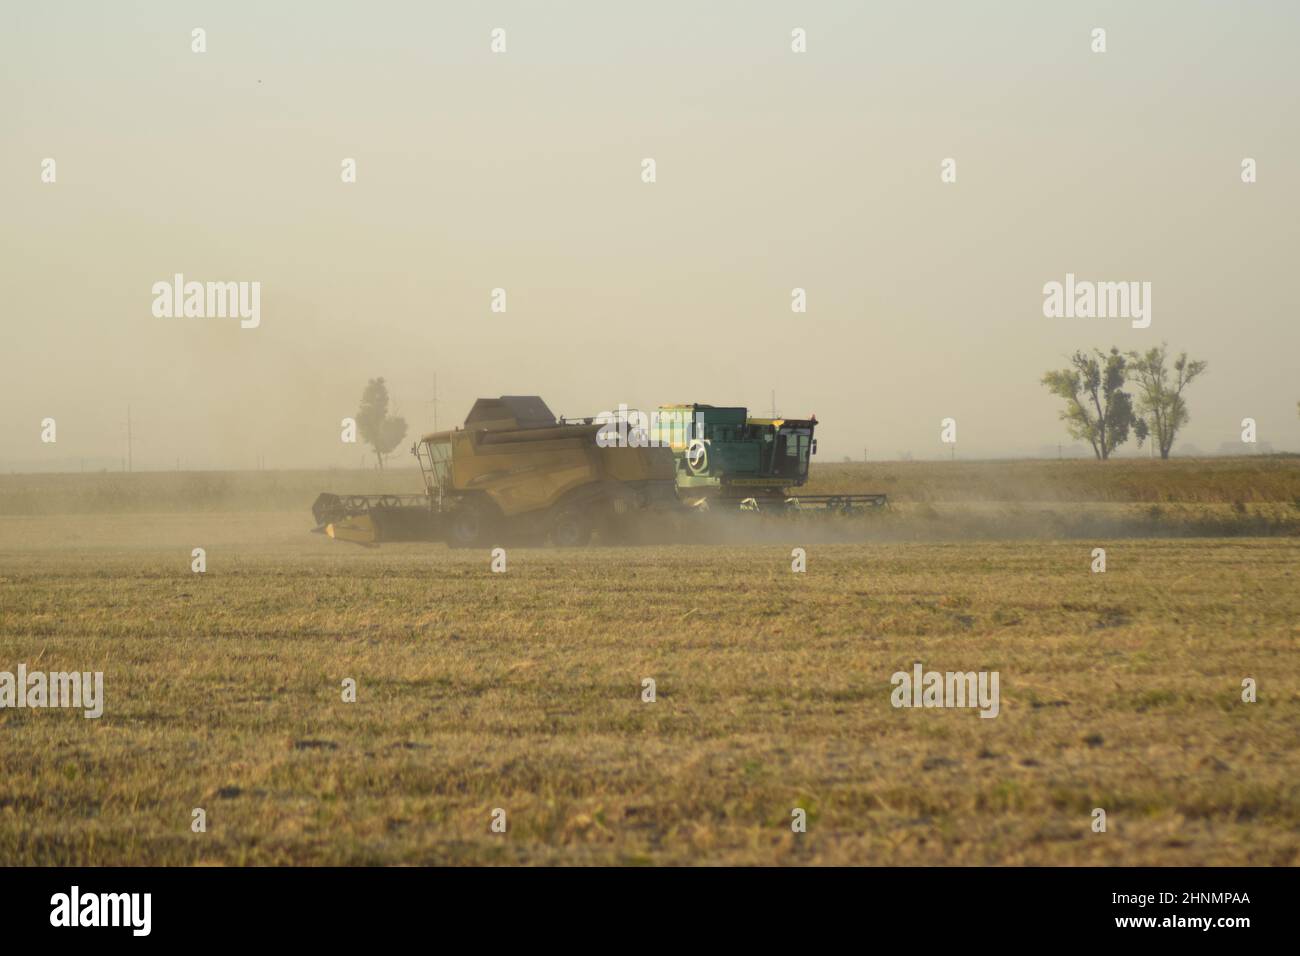 Soy harvesting by combines in the field. Stock Photo